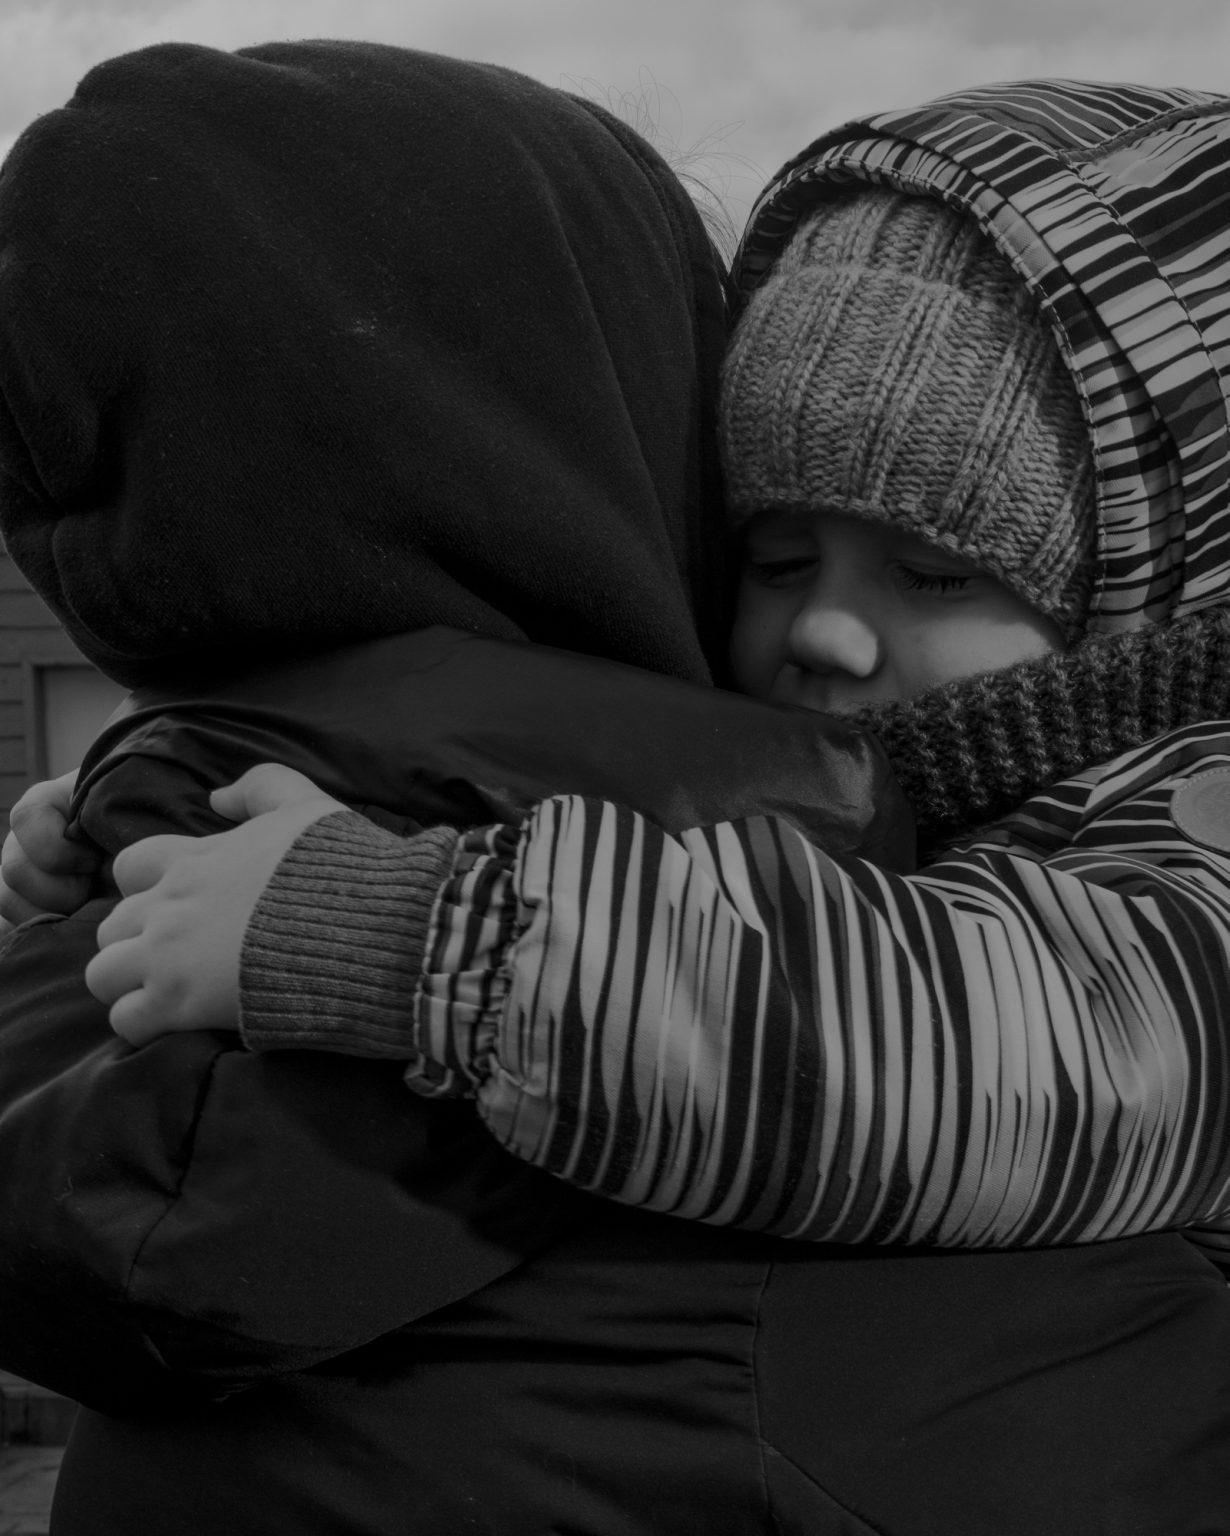 A mother with her bay at Medyka's border crossing.. More than 600,000 Ukrainians fleeing the conflict have already crossed this border making Poland the country with the largest number of refugees with one million people welcomed. Medyka, Poland. March 2022.                                              As Russia invades Ukraine, thousands of Ukrainians are fleeing the country to find shelter in bordering countries. 
---------
Con l'invasione russa ai danni dell'Ucraina, migliaia di ucraini sono in fuga dalla nazione d'origine per cercare rifugio nelle nazioni confinanti.